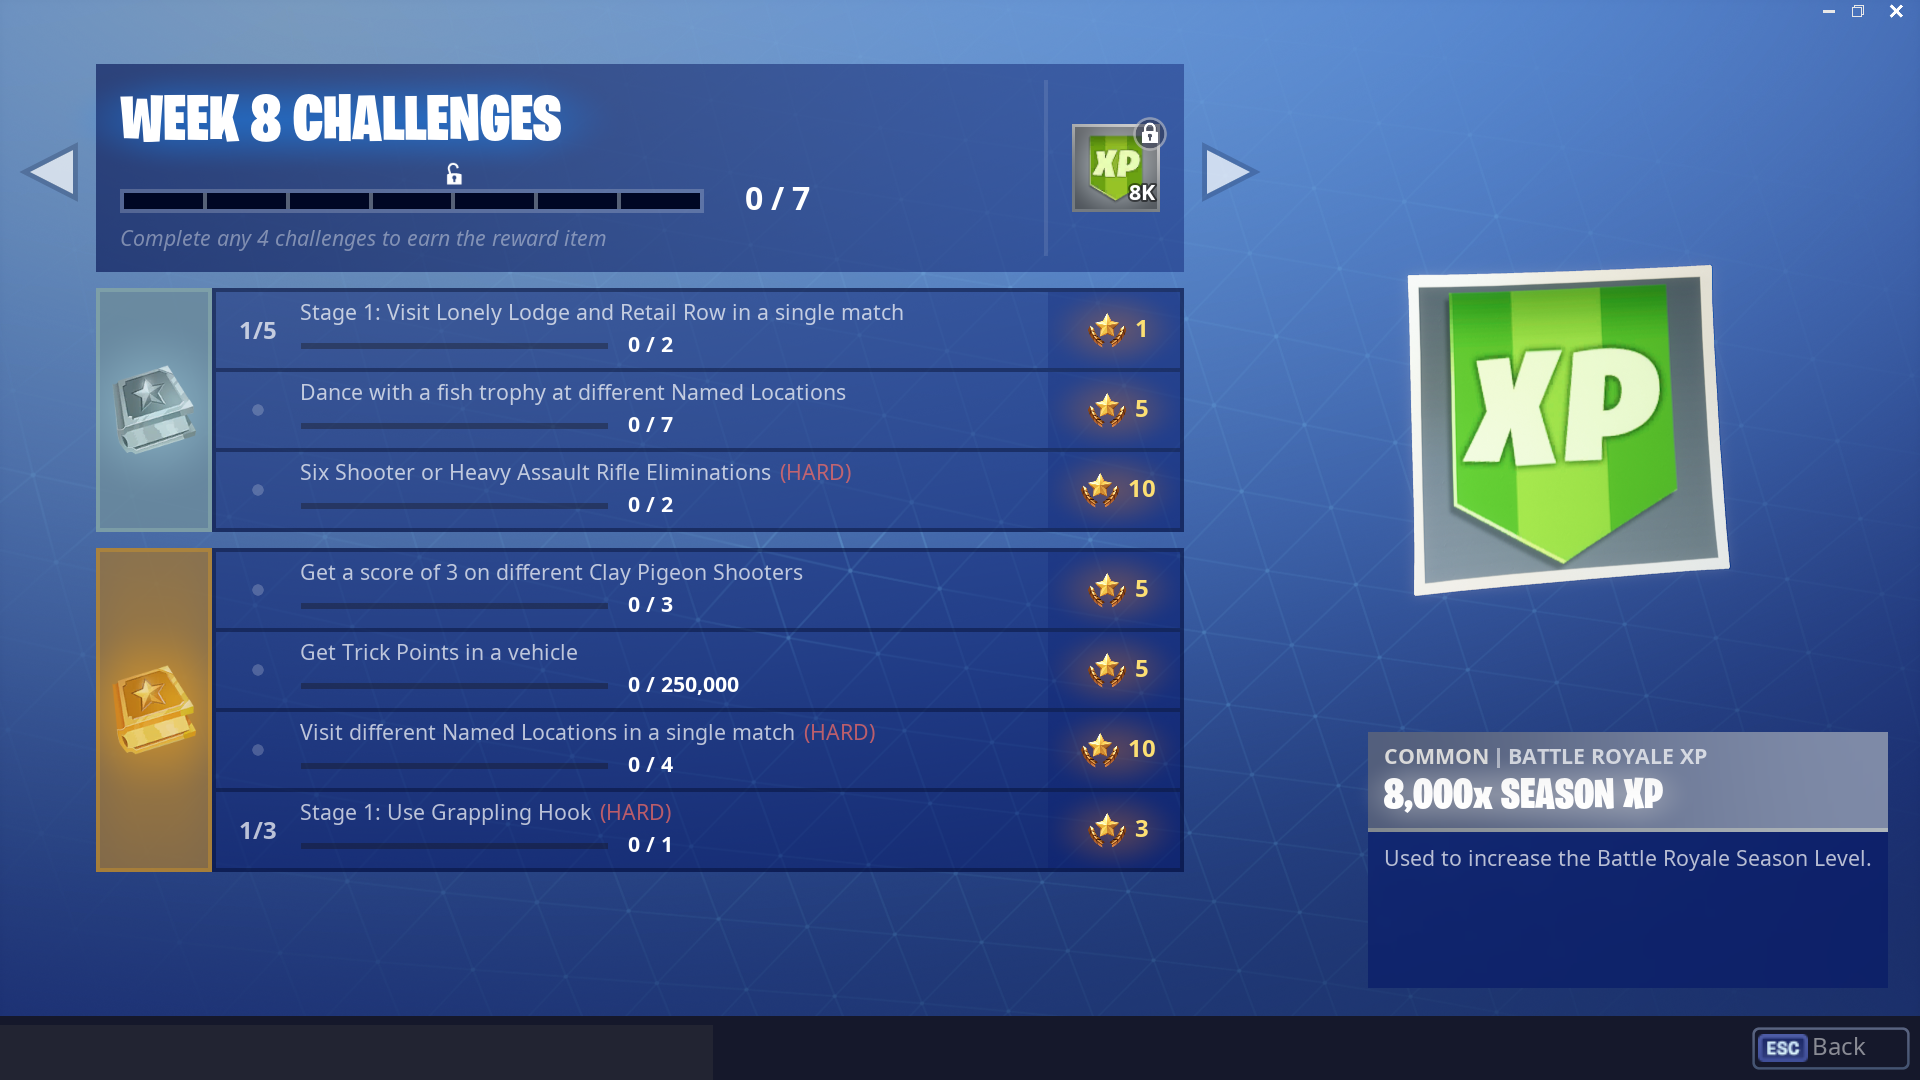 battle pass challenges and solutions for fortnite battle royale week 8 season 6 fortnite news and statistics ss1 - dance fish trophy fortnite